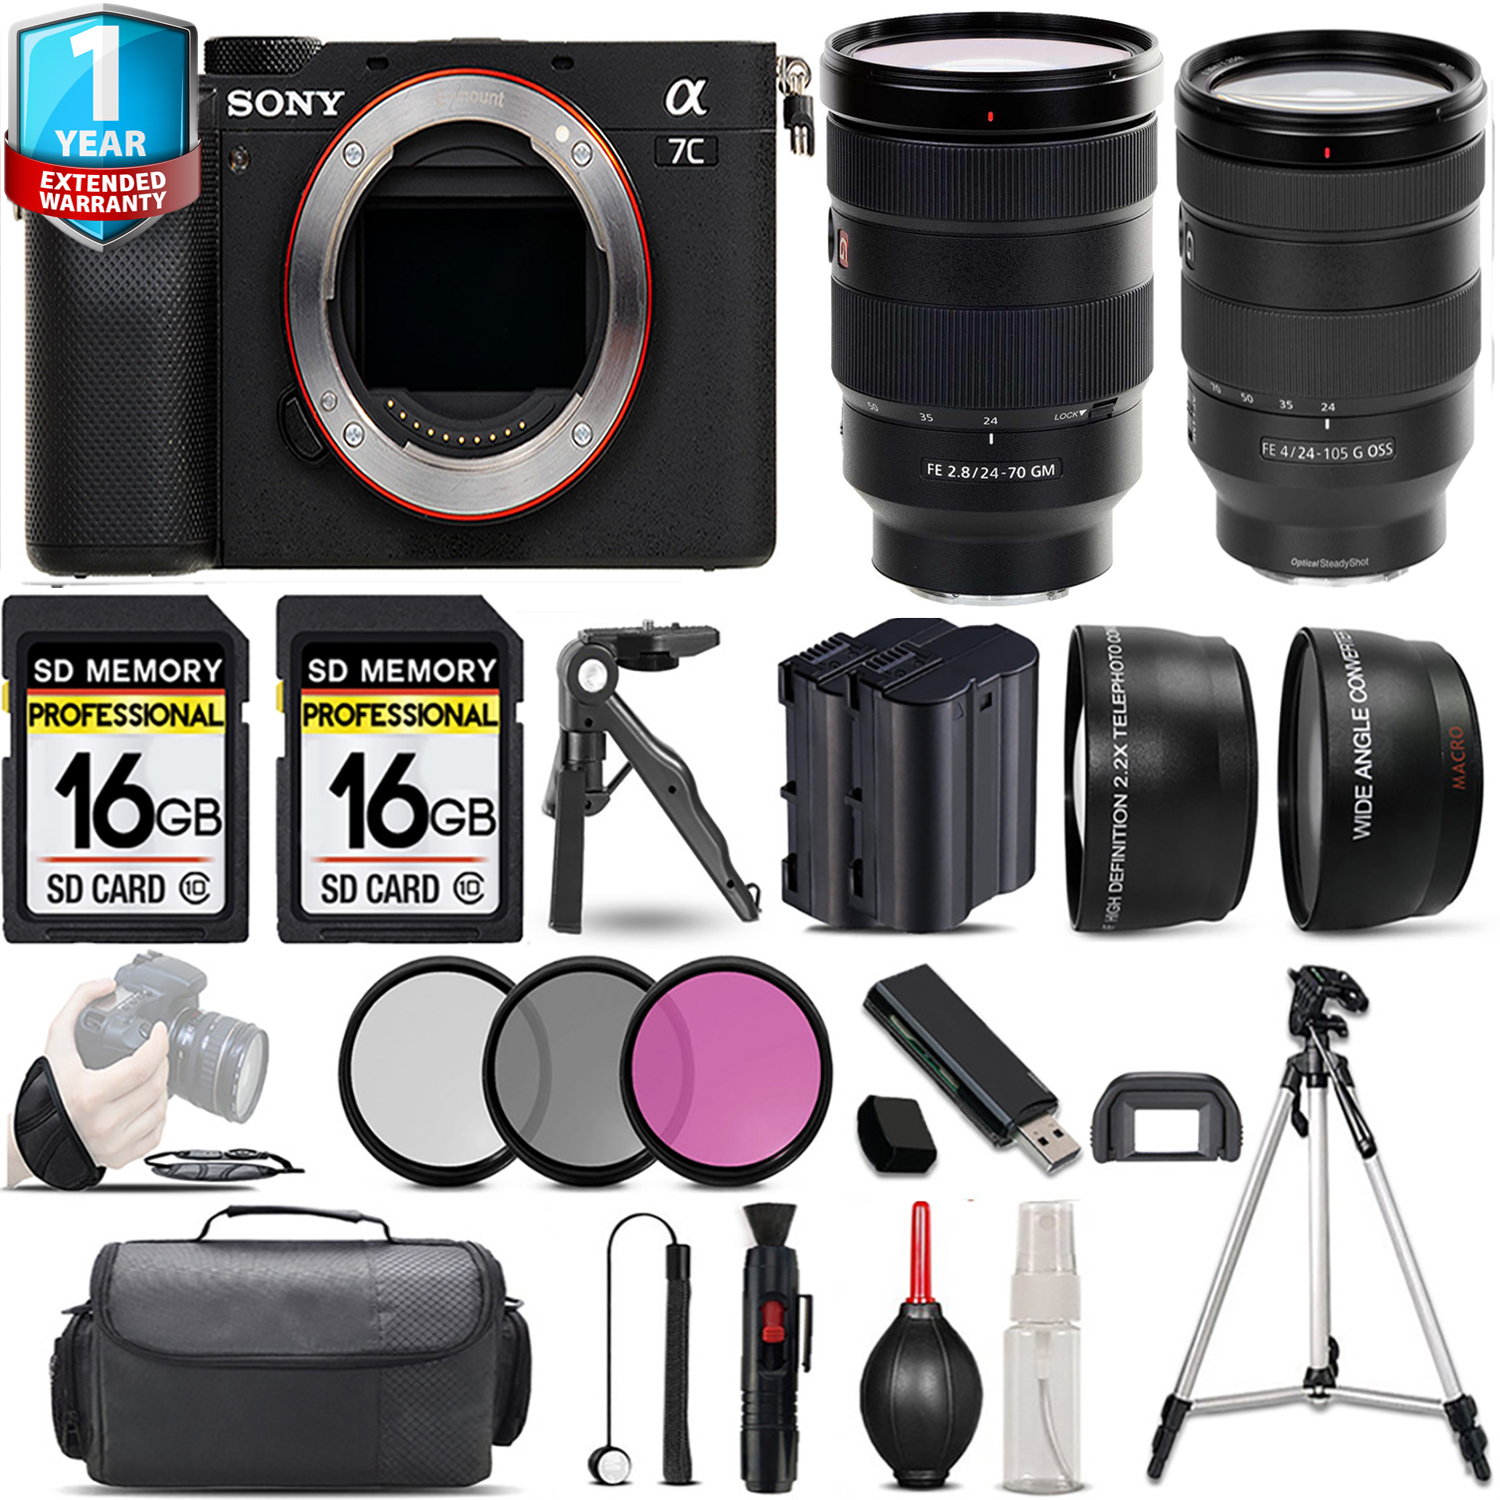 Alpha a7C Camera (Silver) + 70- 300mm Lens + 24-70mm Lens + 1 Year Extended Warranty + 32GB - Kit *FREE SHIPPING*